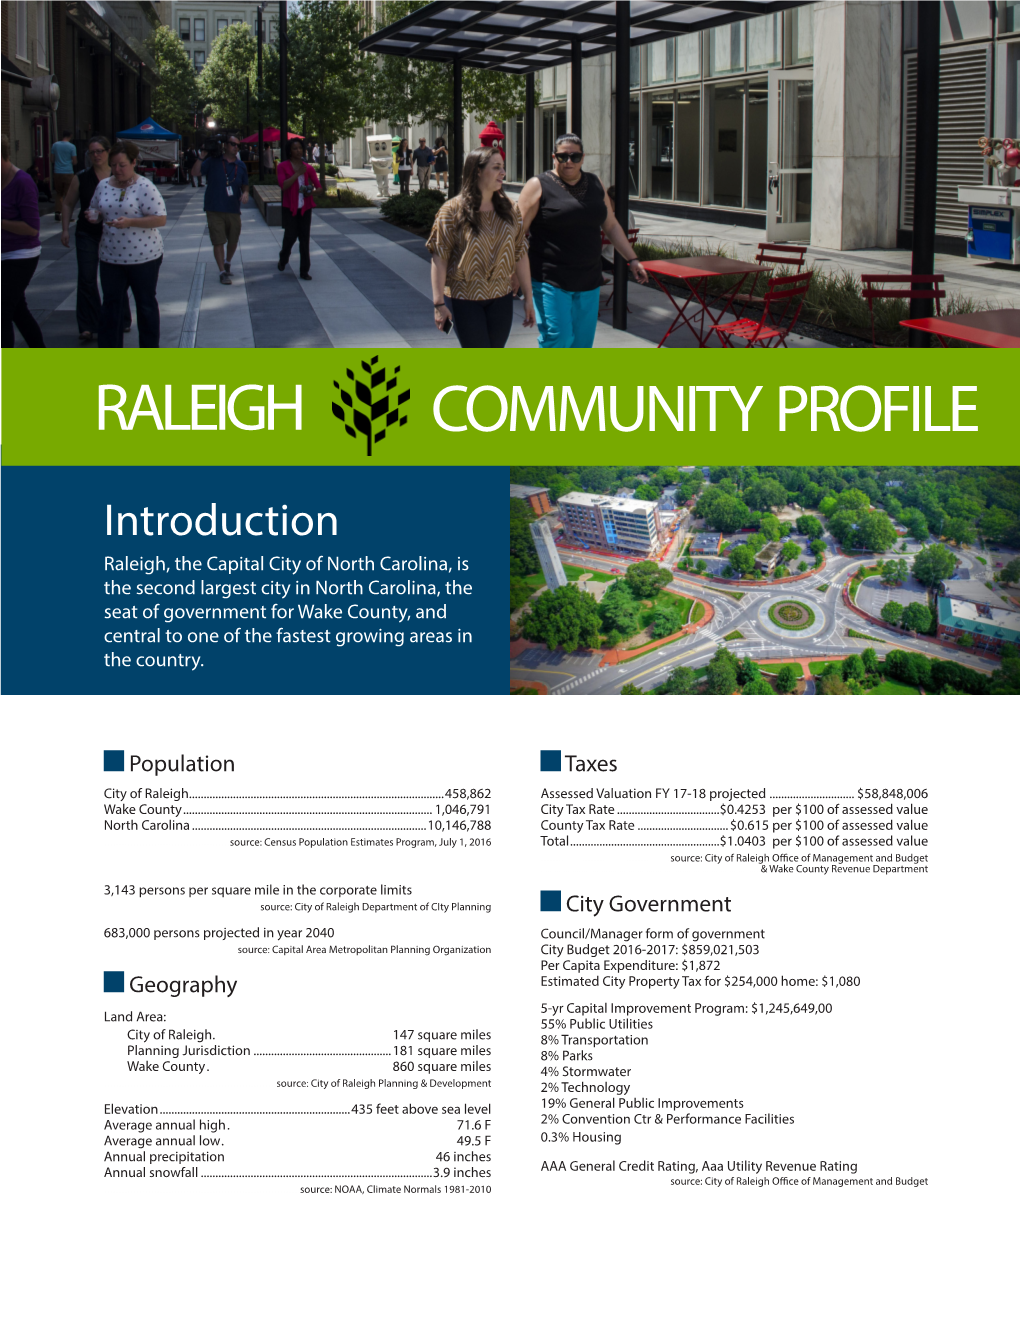 City of Raleigh Community Profile